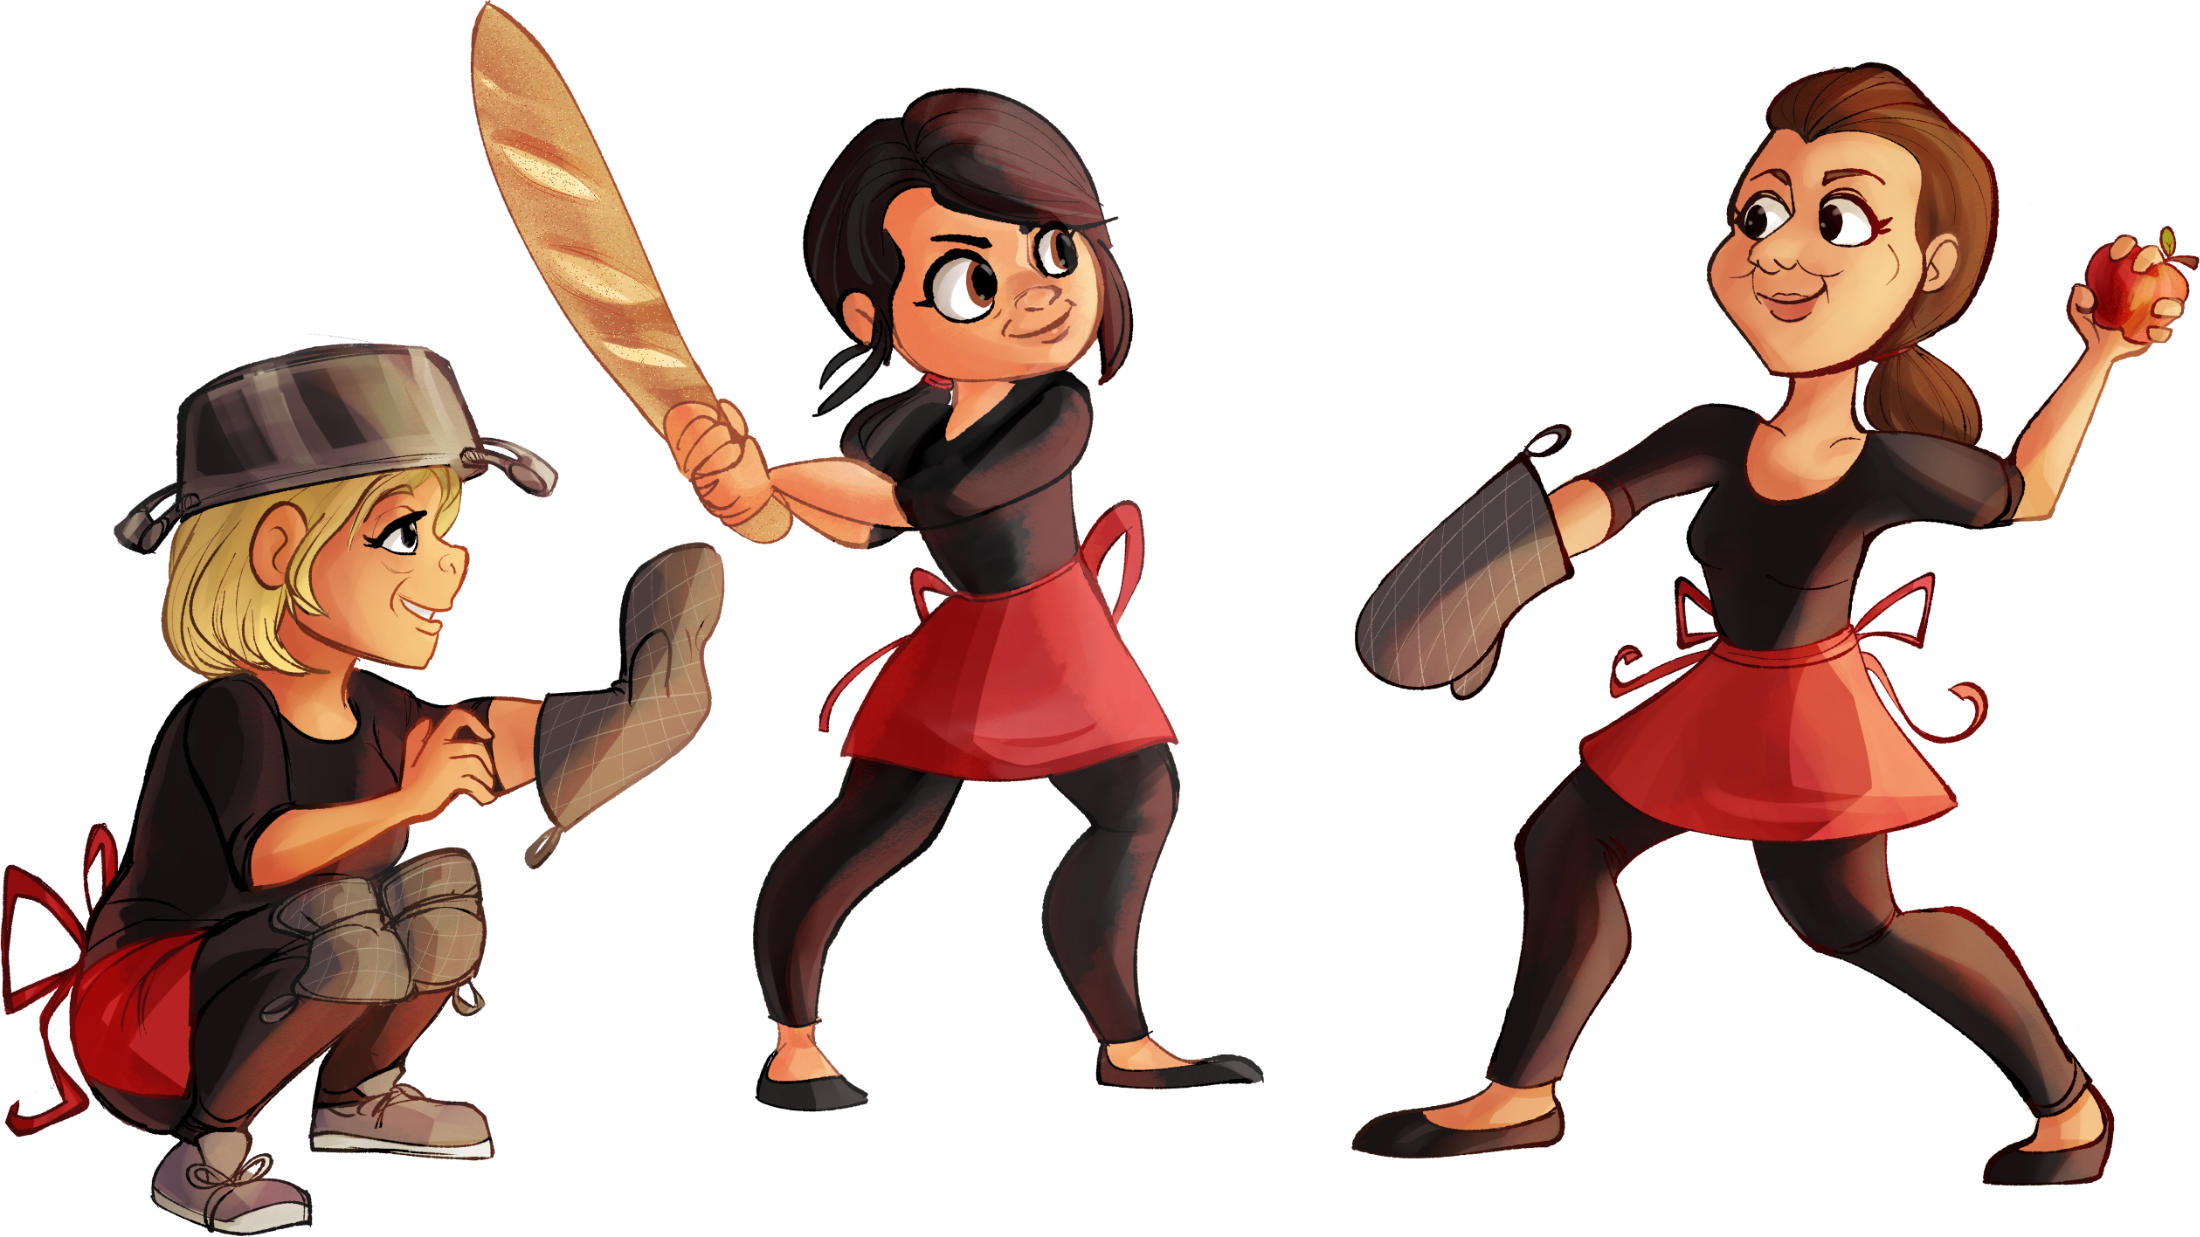 An illustration of Colleen, Stephanie and Christina dressed in makeshift baseball attire using every-day kitchen items, playing with food.